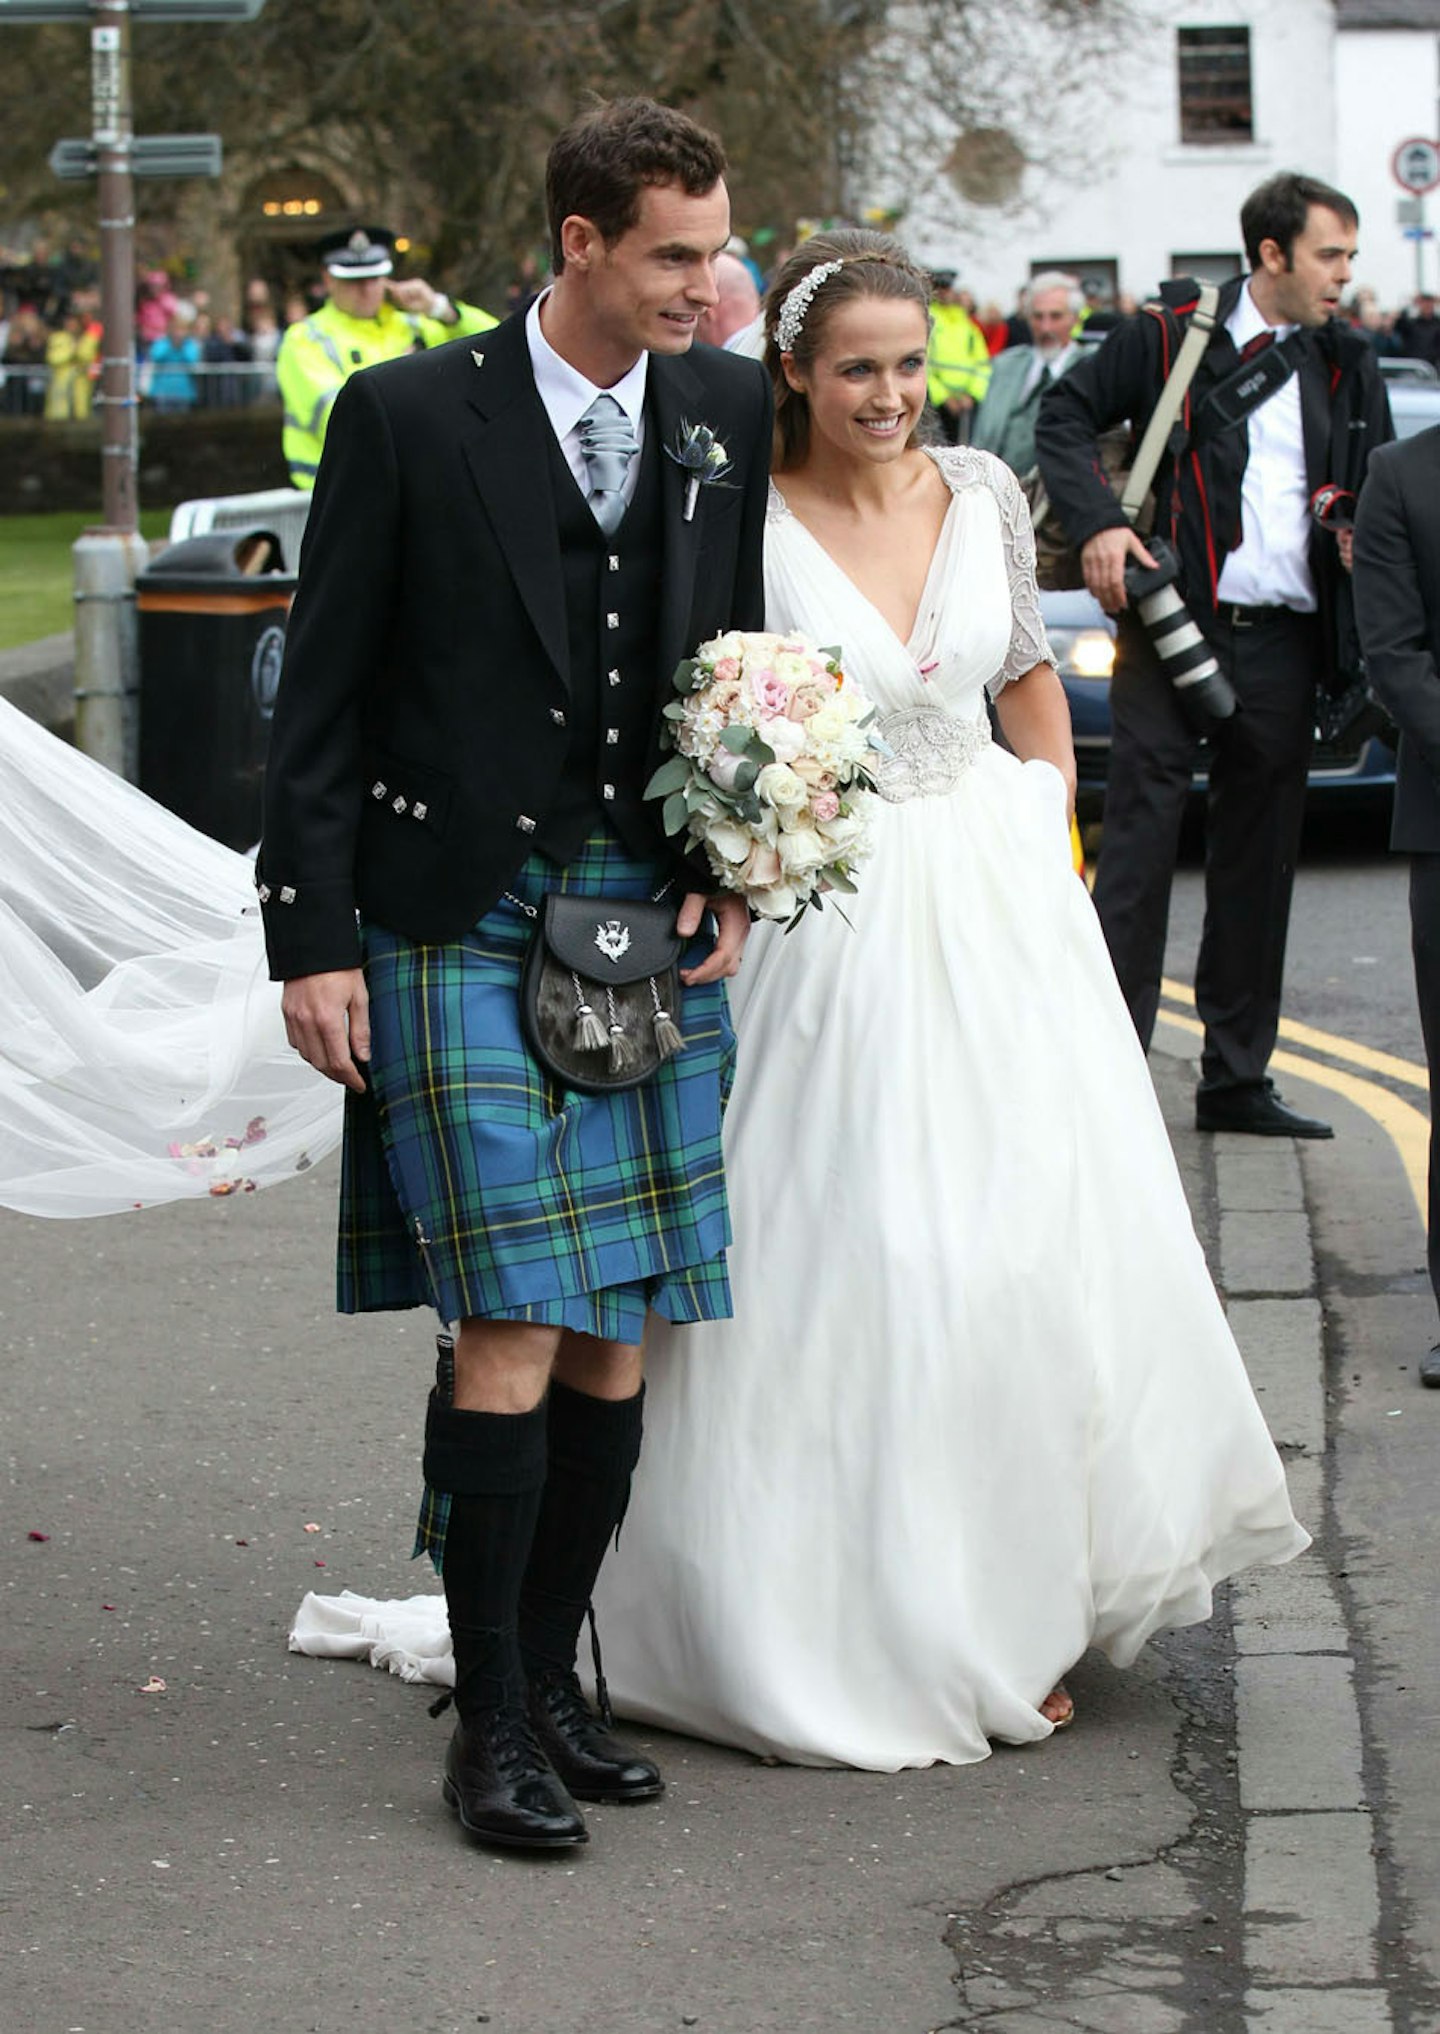 Andy and Kim on their wedding day.